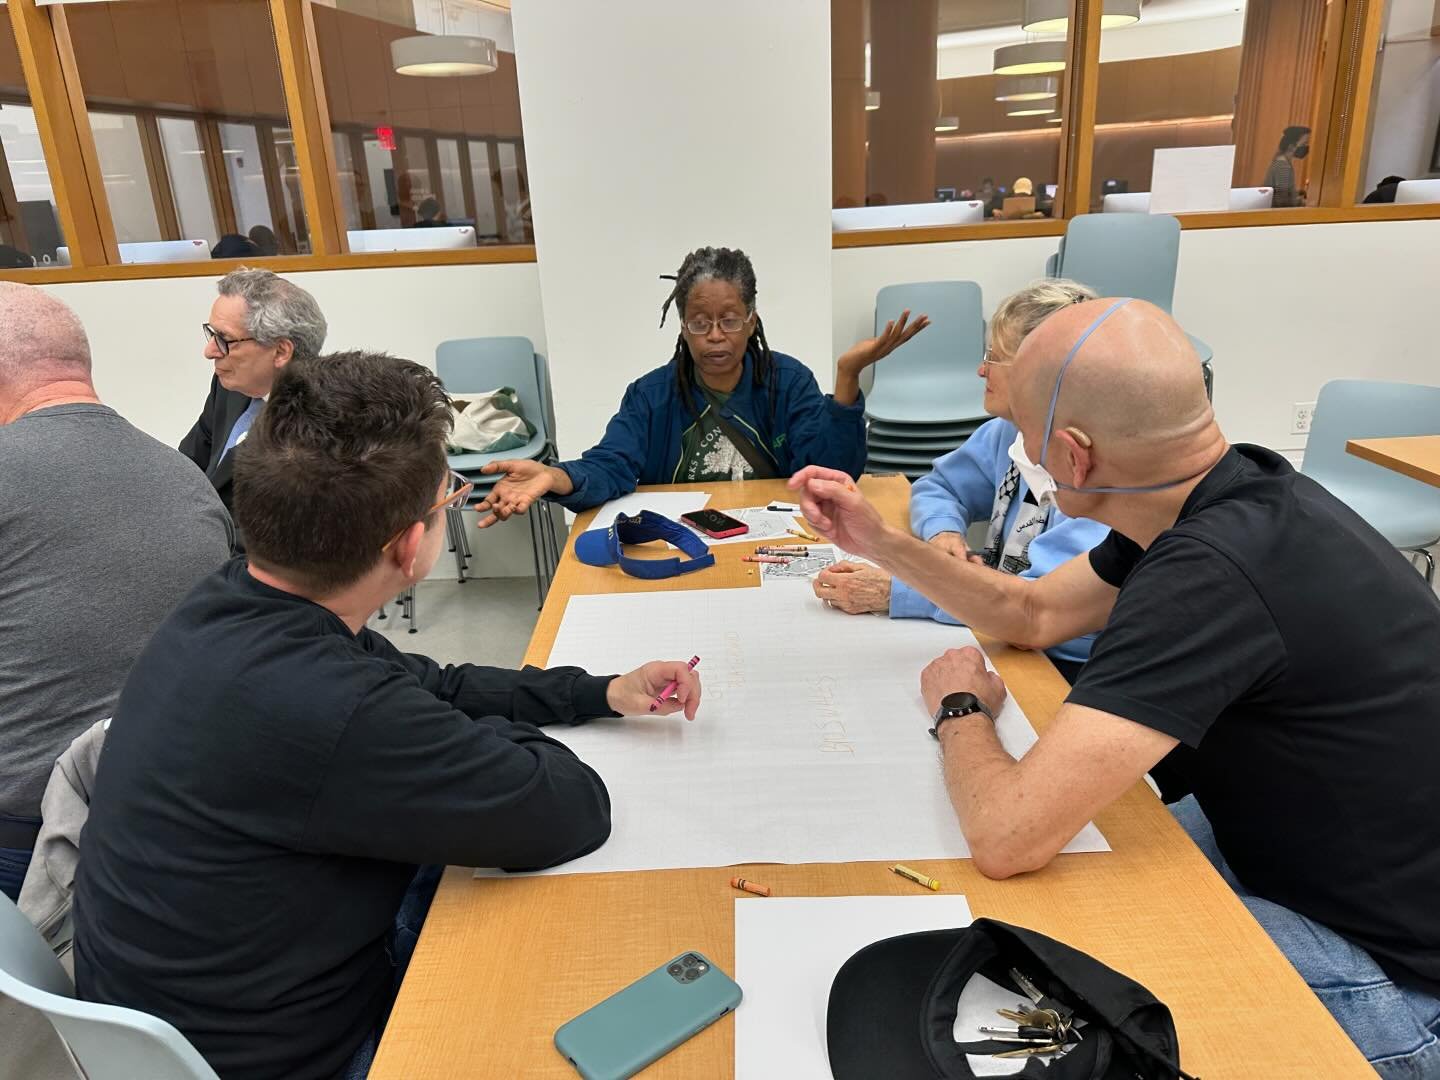 Users of Mount Prospect Park shared some of the improvements they would like to see: reseeding the oval, finding green solutions to flooding, greening the playground, the use of solar energy and more. #dontpavethepark #greenspace #prospectheights #br